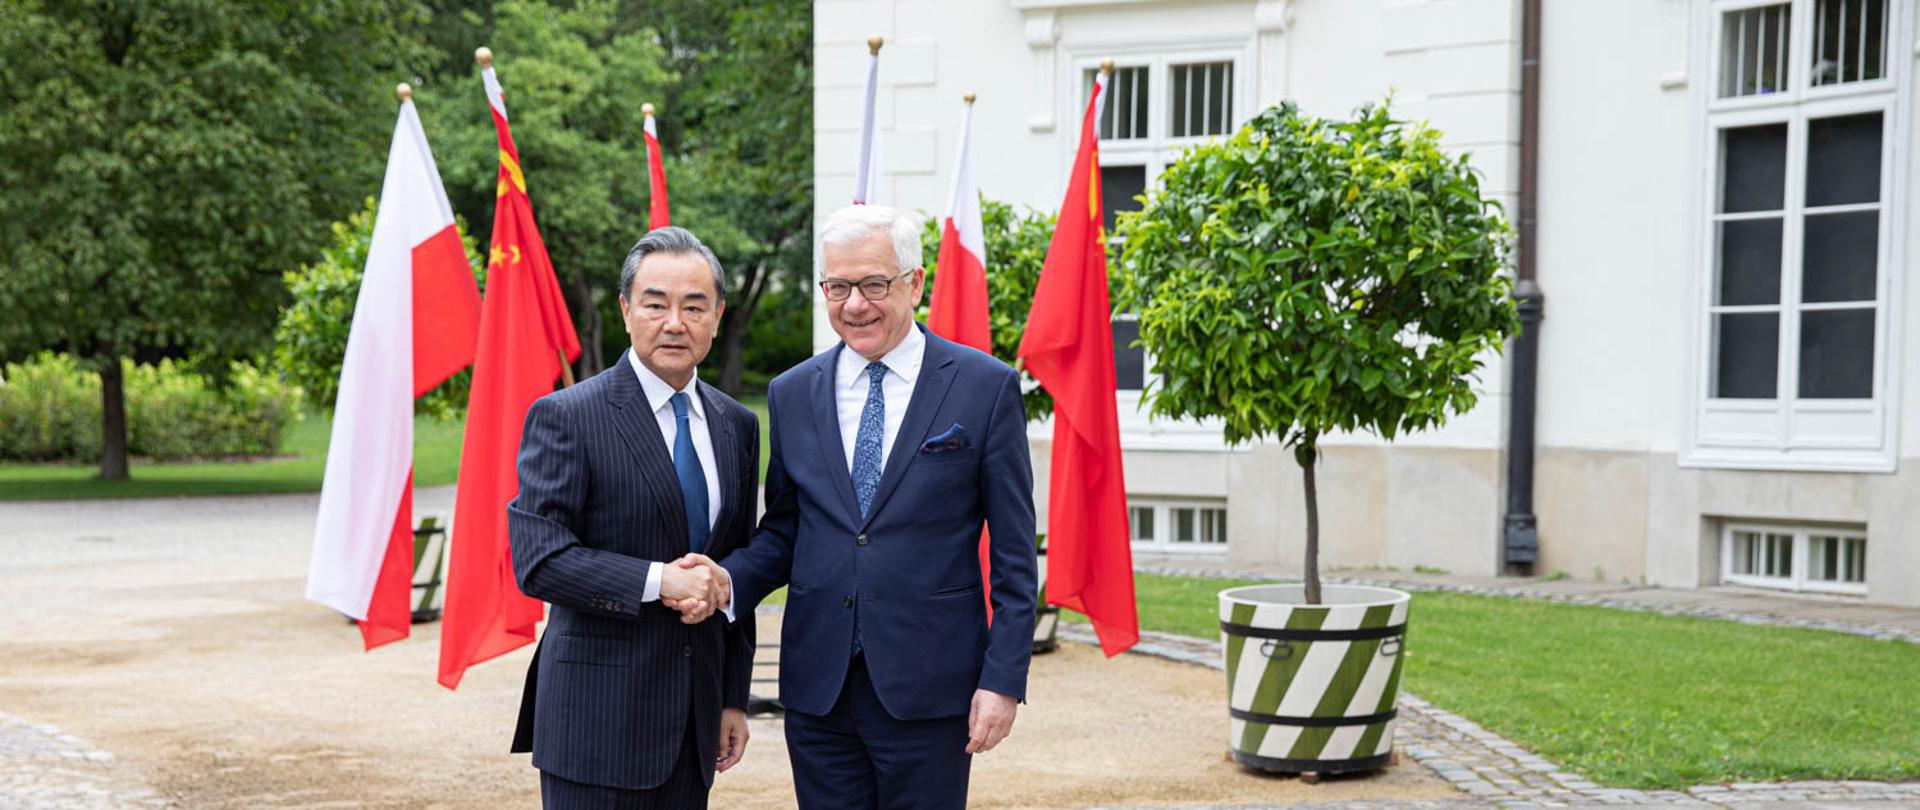 The visit of the People’s Republic of China’s foreign minister to Warsaw